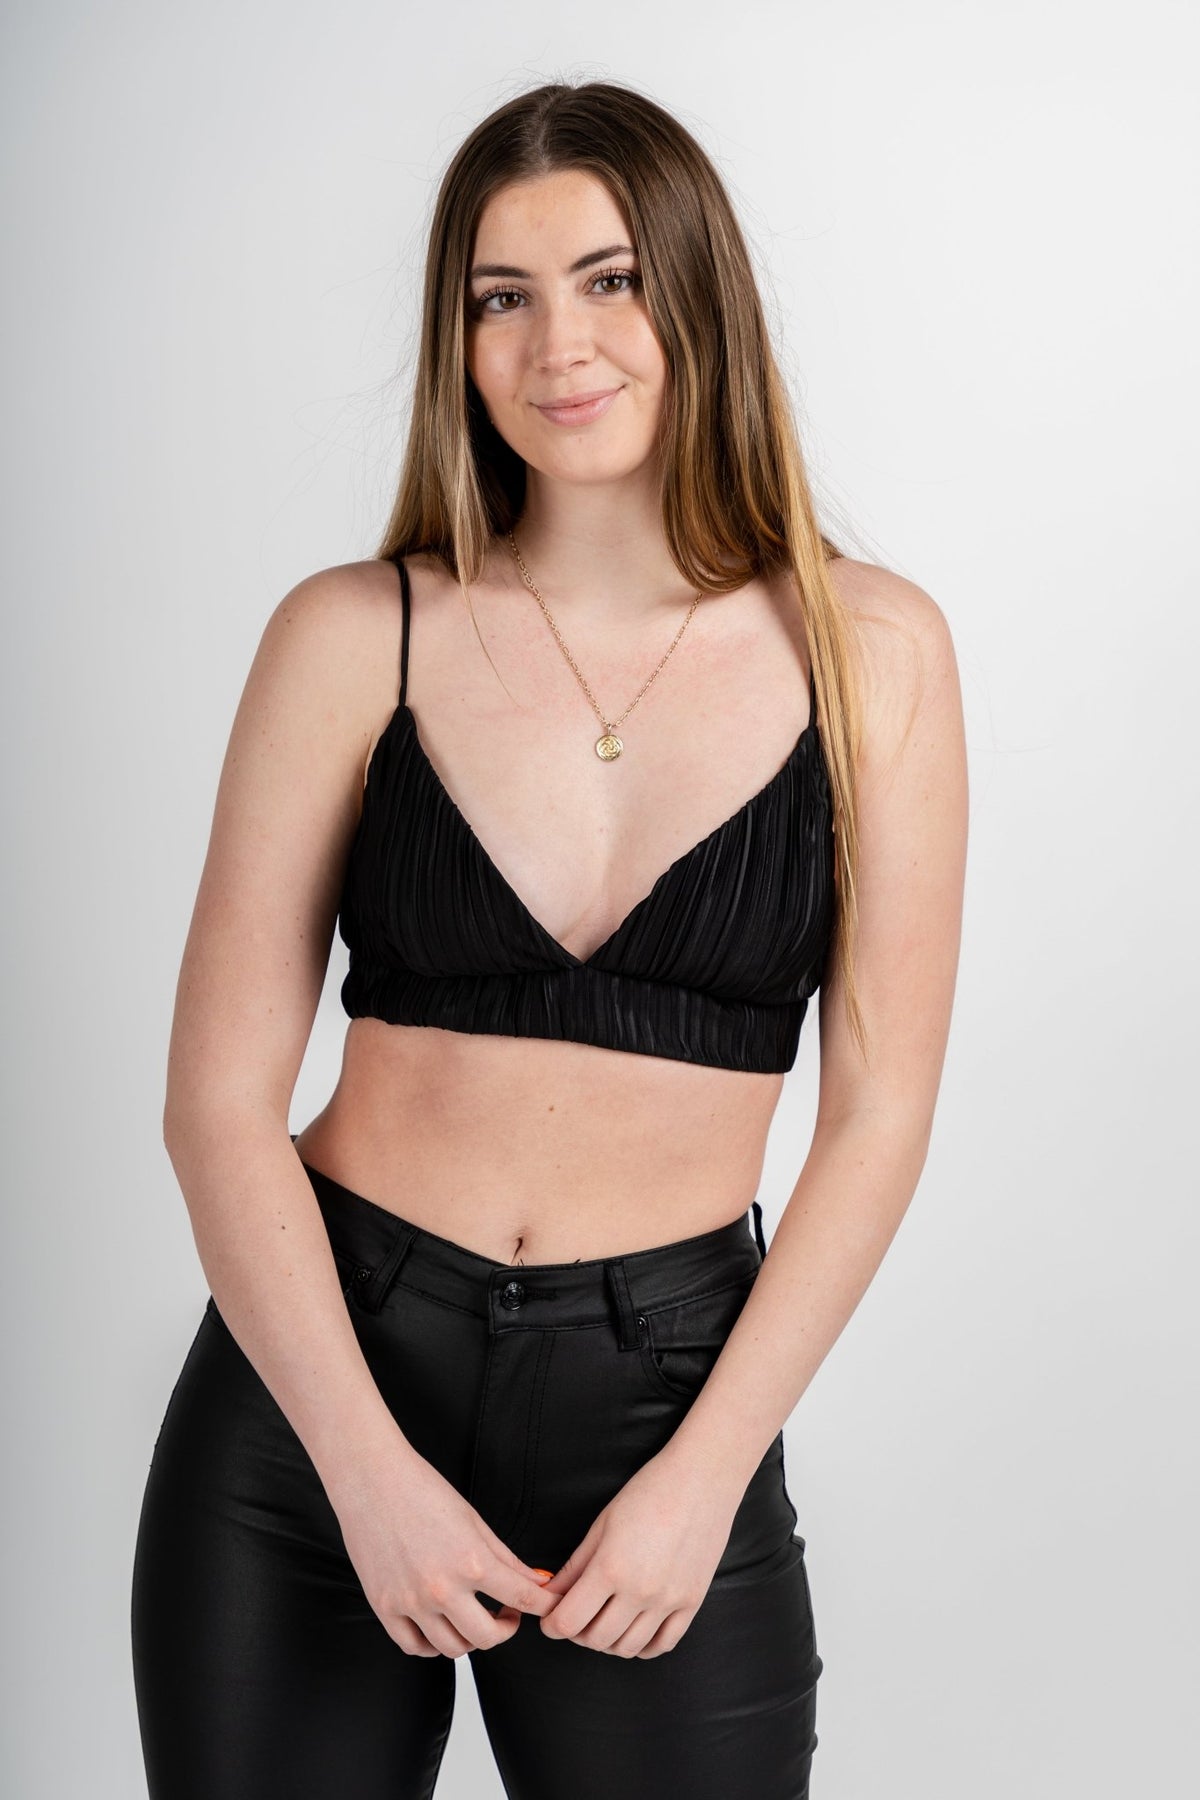 Pleated bralette top black - Cute Top - Trendy Bras and Bralettes at Lush Fashion Lounge Boutique in Oklahoma City